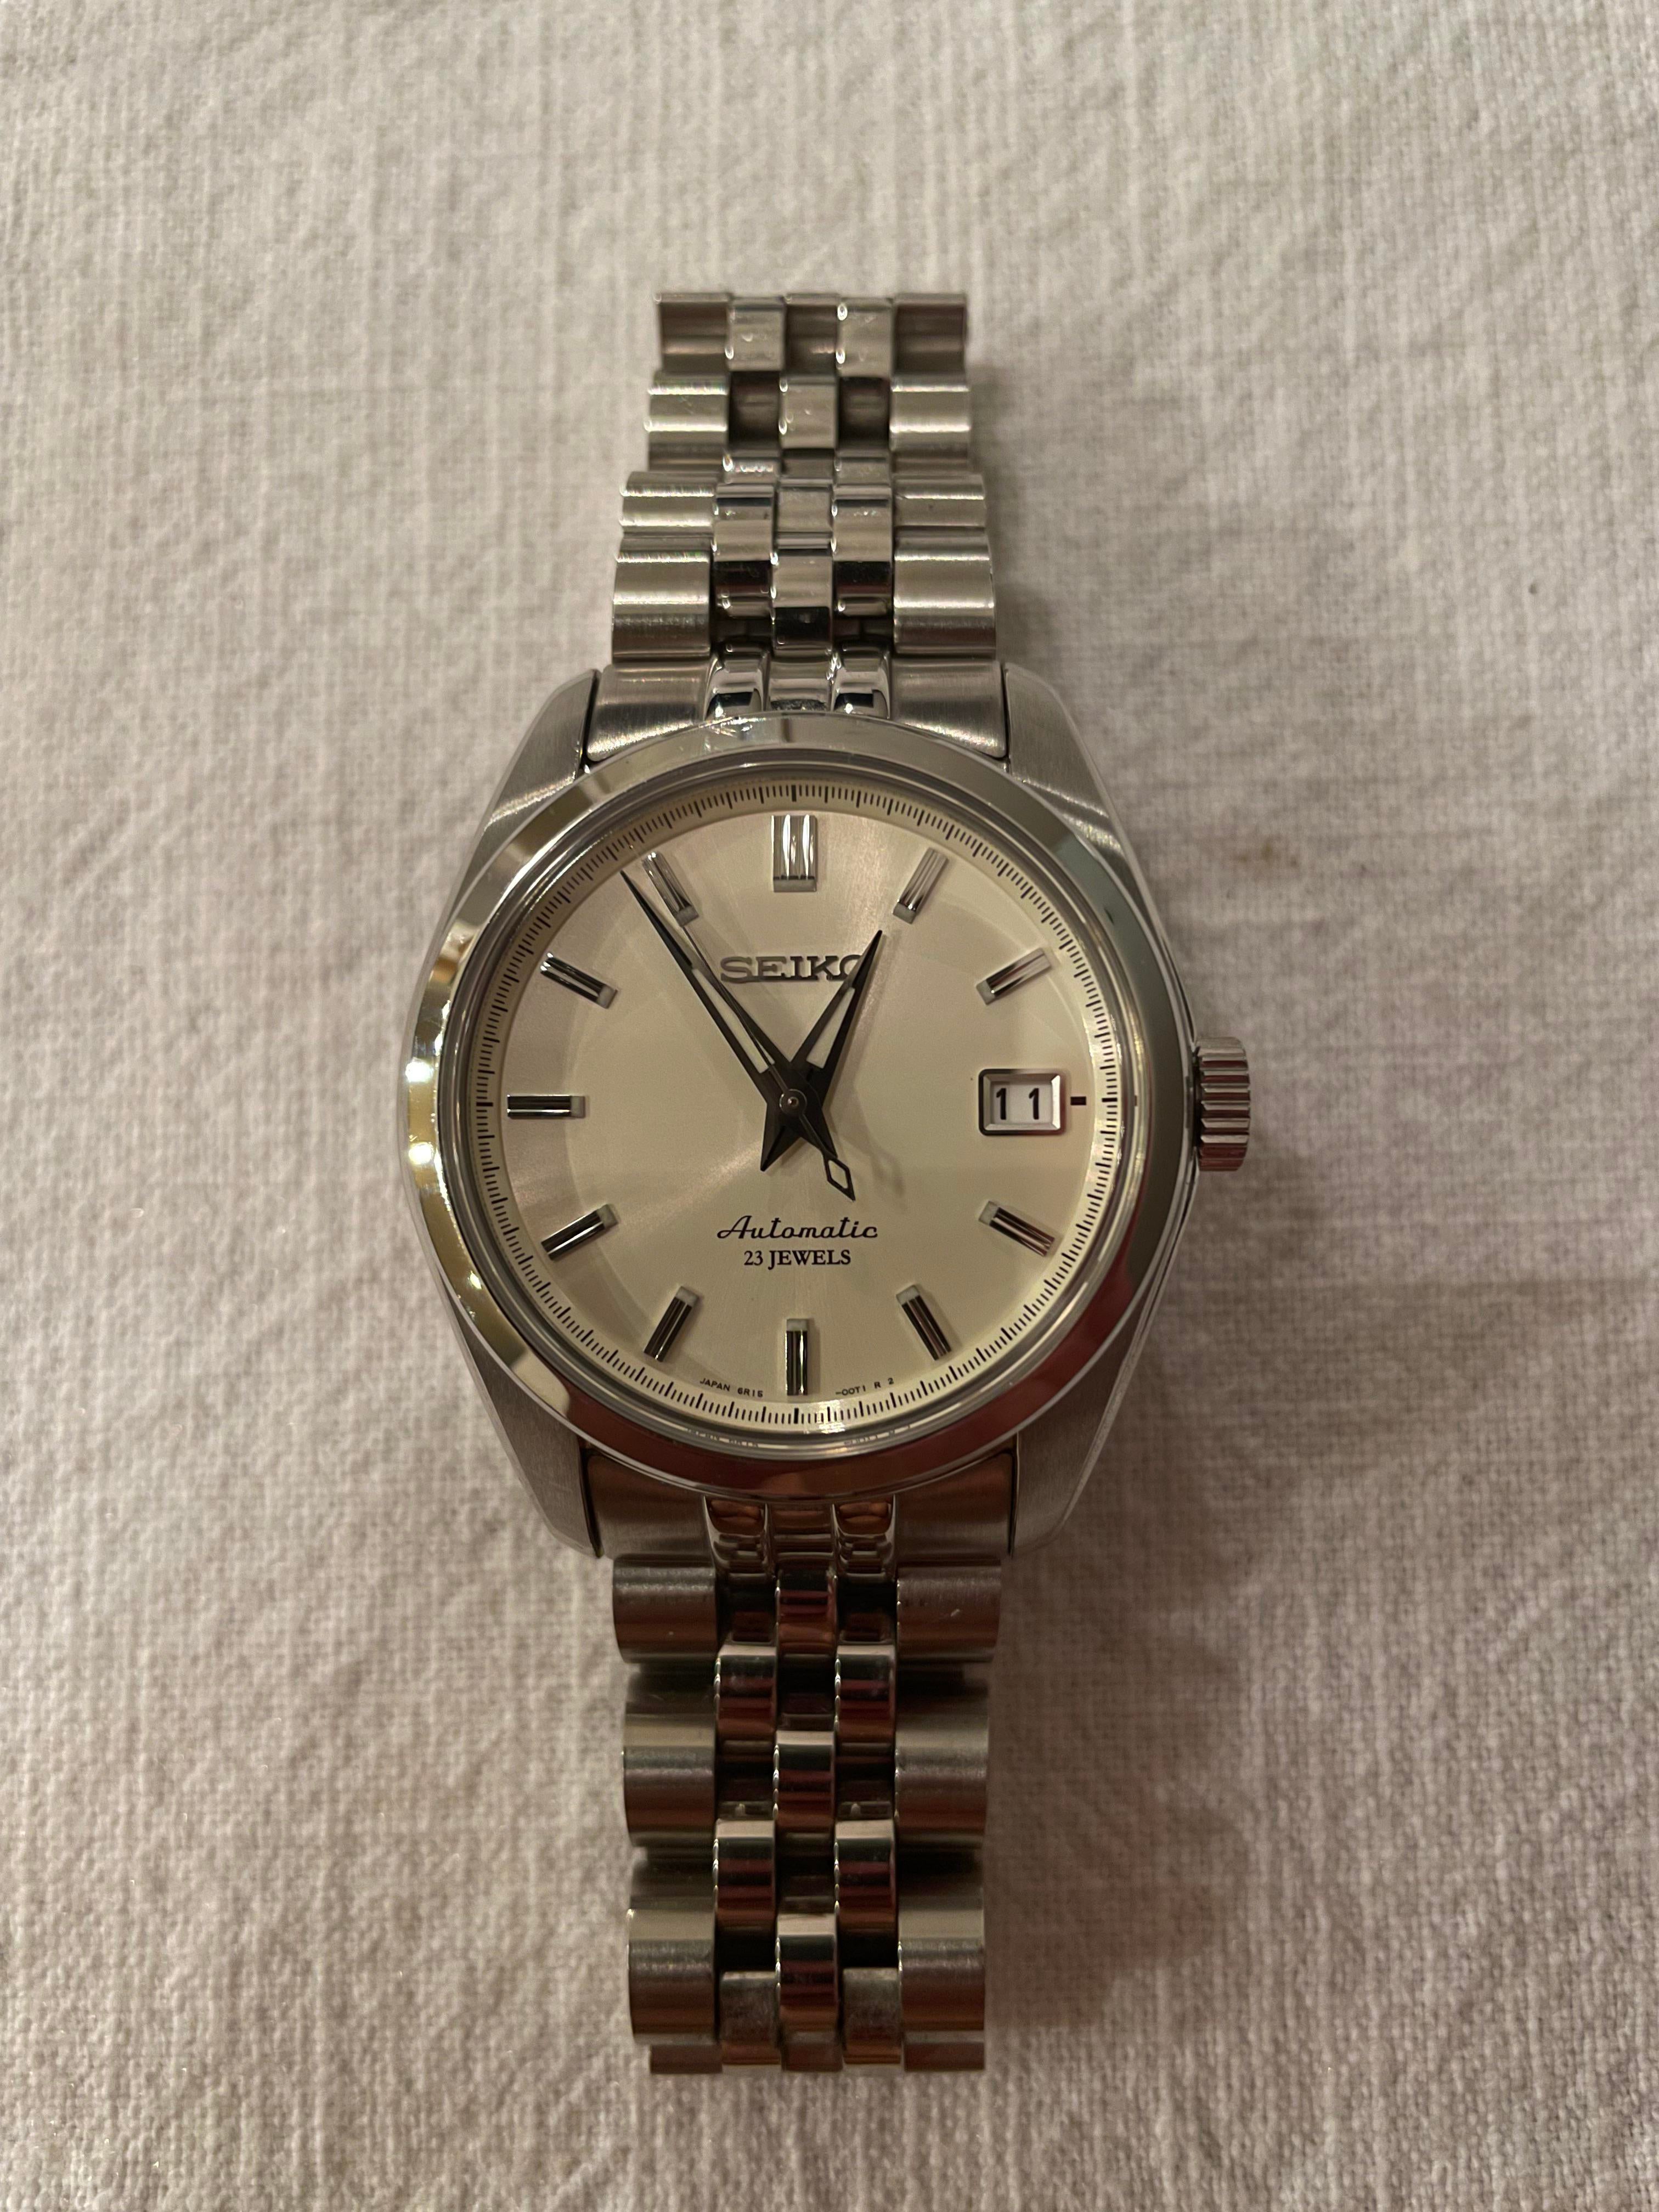 WTS] Seiko SARB035 With Strapcode Angus Jubilee Bracelet $650 | WatchCharts